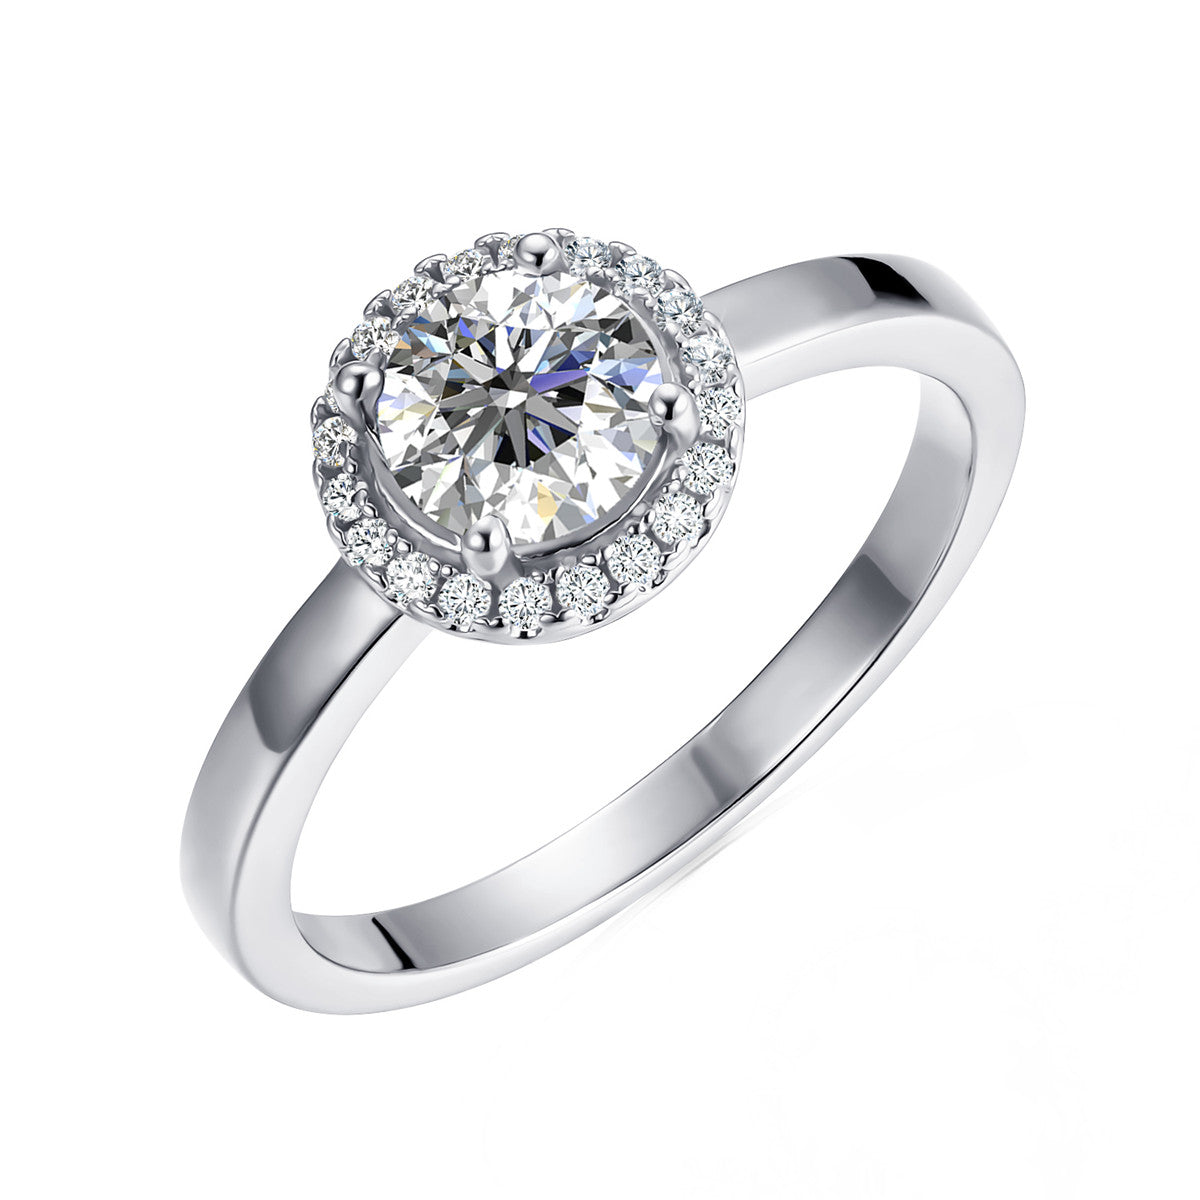 Moissanite by Cate & Chloe Cora Sterling Silver Ring with Moissanite and 5A Cubic Zirconia Crystals